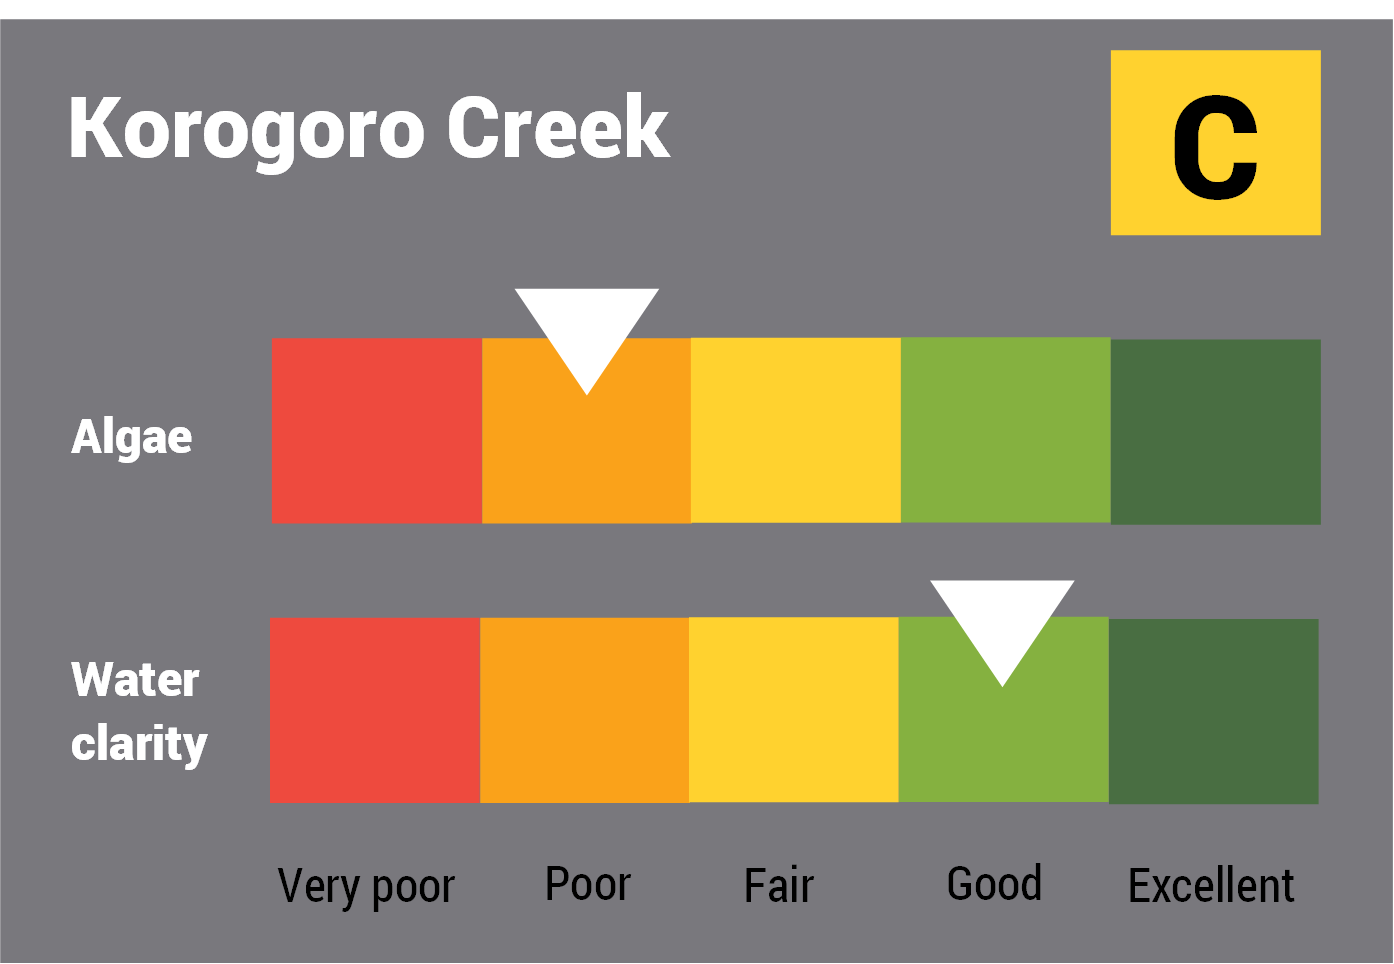 Korogoro Creek water quality report card for algae and water clarity showing colour-coded ratings (red, orange, yellow, light green and dark green, which represent very poor, poor, fair, good and excellent, respectively). Algae is rated 'good' and water clarity is rated 'poor' giving an overall rating of 'fair' or 'C'.